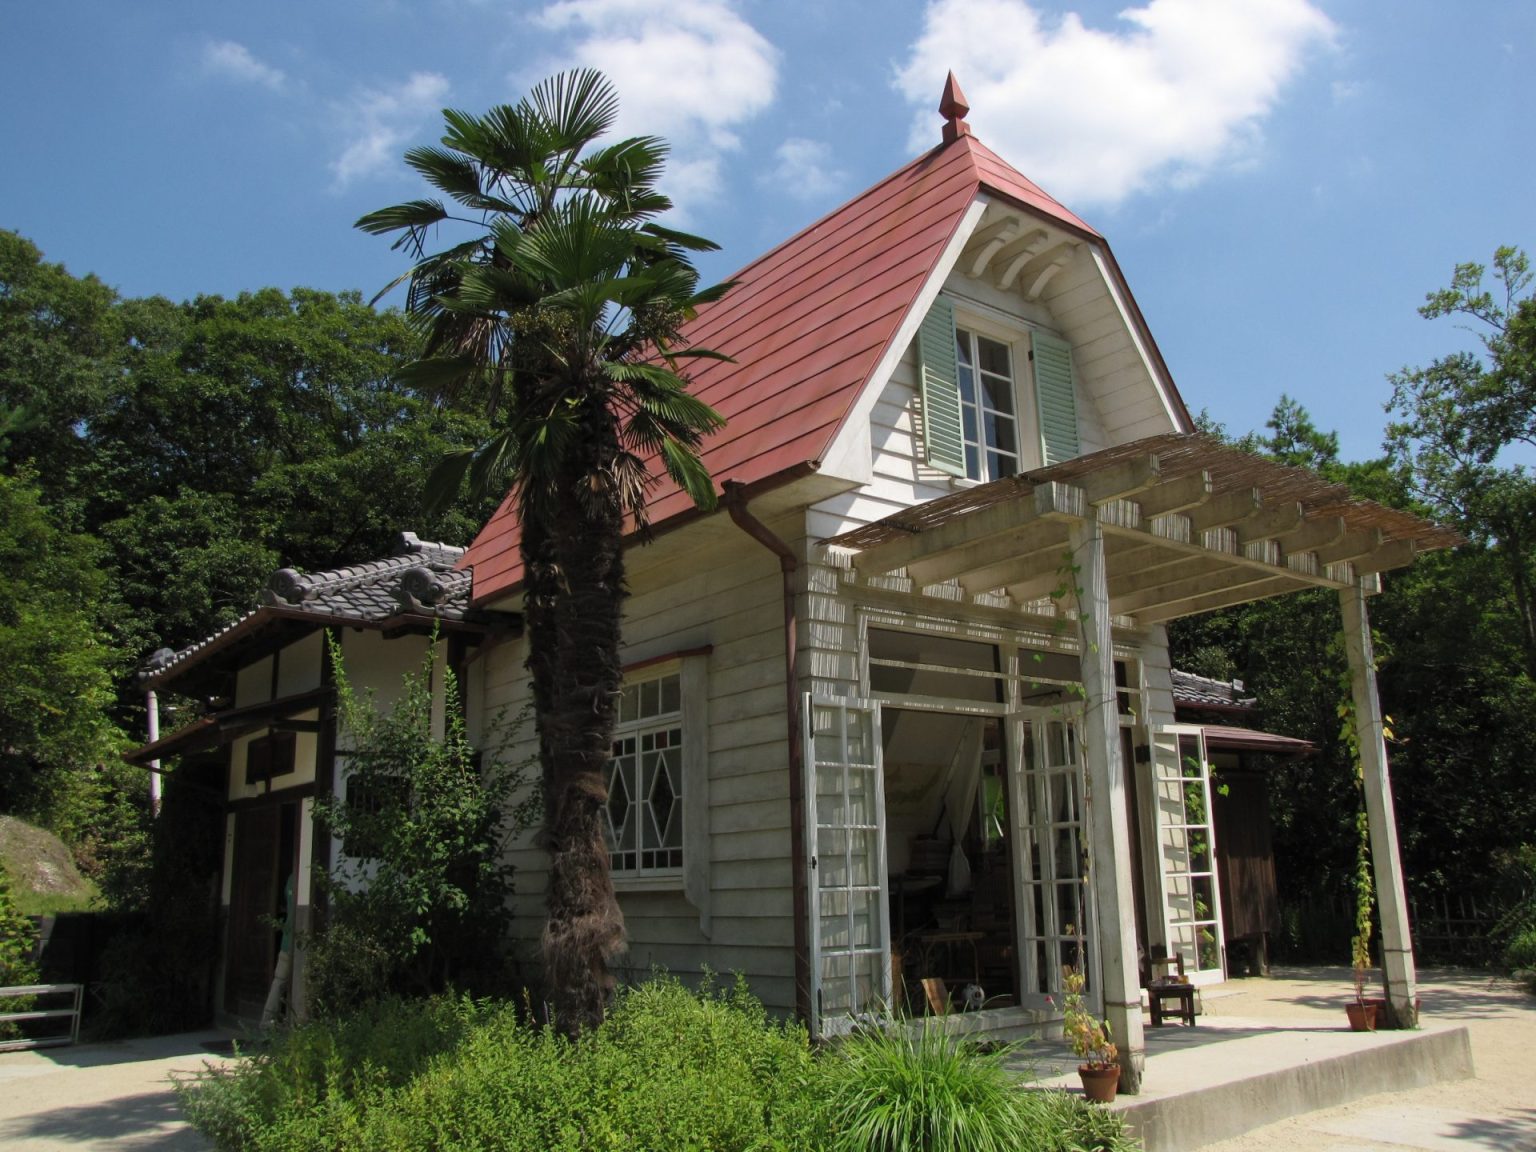 See Satsuki and May's house filmed just before the opening of Ghibli Park